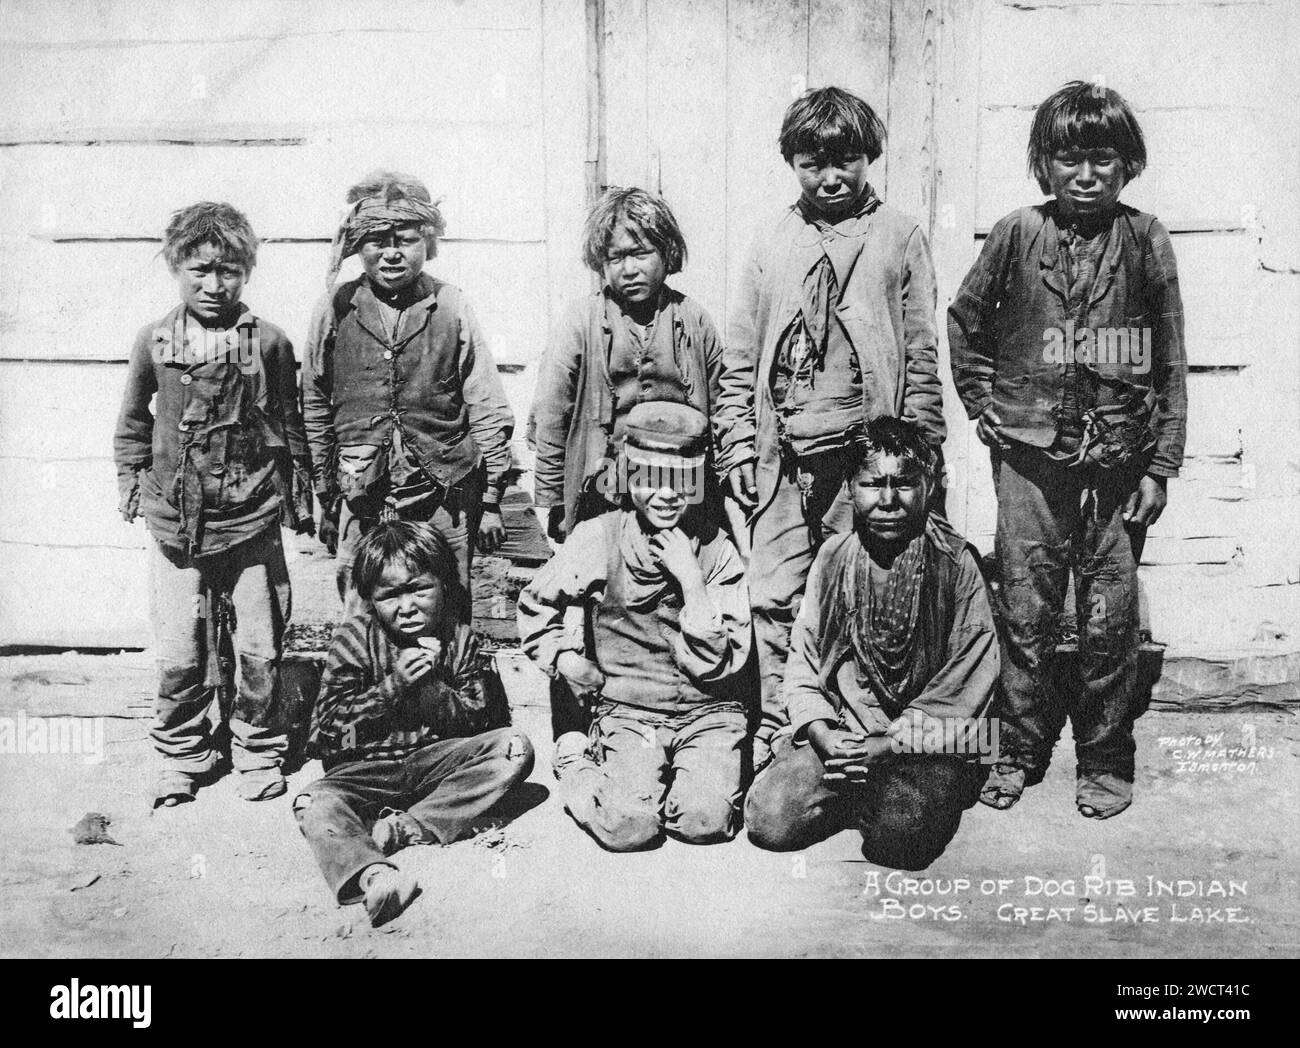 A 1901 photograph of young boys of the Tlicho people, indigenous Dene First Nations people, at Great Slave Lake in the Northwest Territories, taken by C W Mathers on an expedition to the far north of Canada and published in his book ‘The Far North’. Mathers captioned this photograph: A group of Dogrib Indian [Tlicho people] boys, Great Slave Lake. Stock Photo